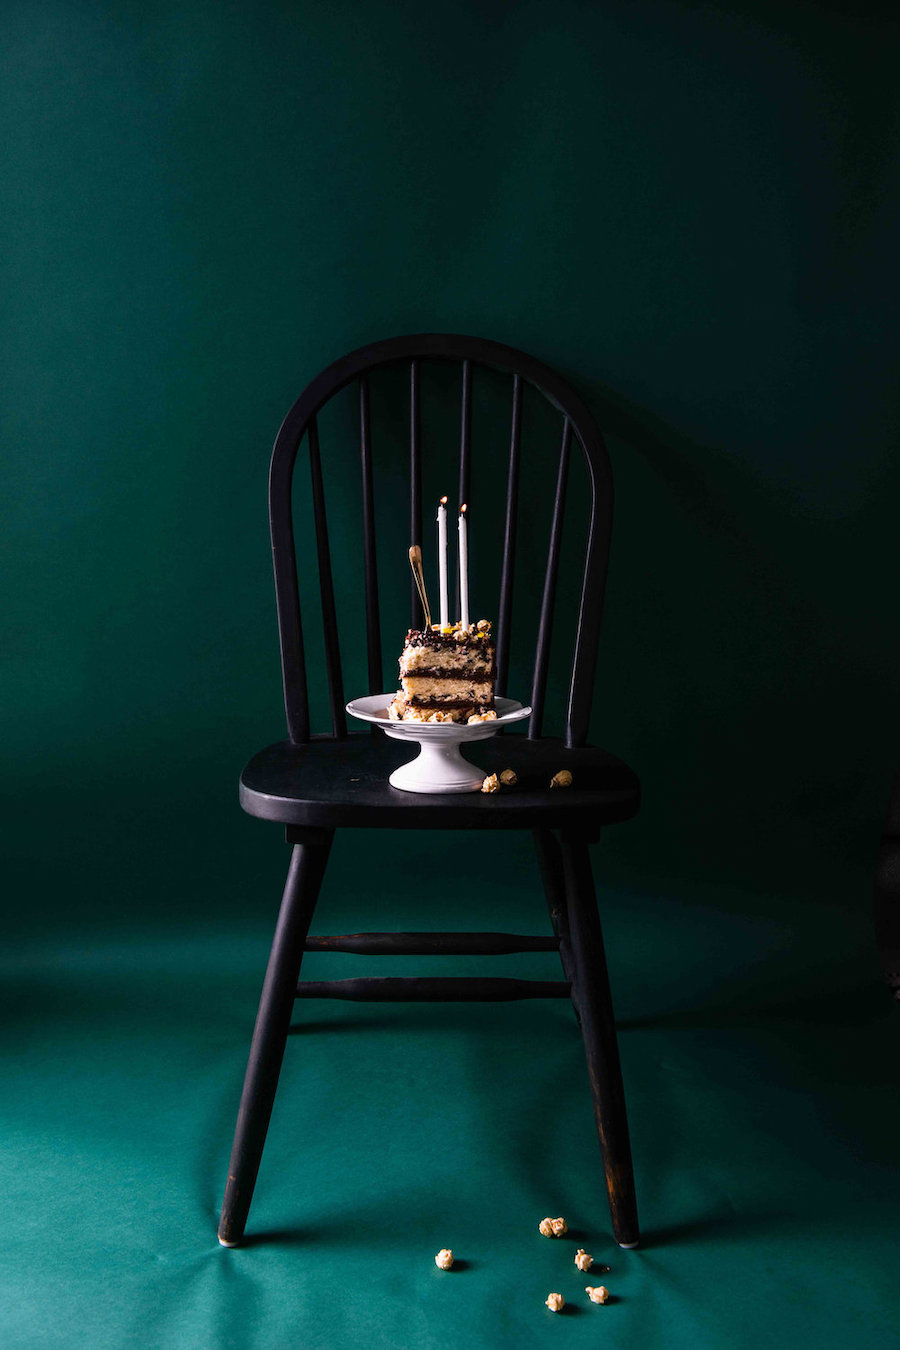 Cake+and+chair+low+res.jpg